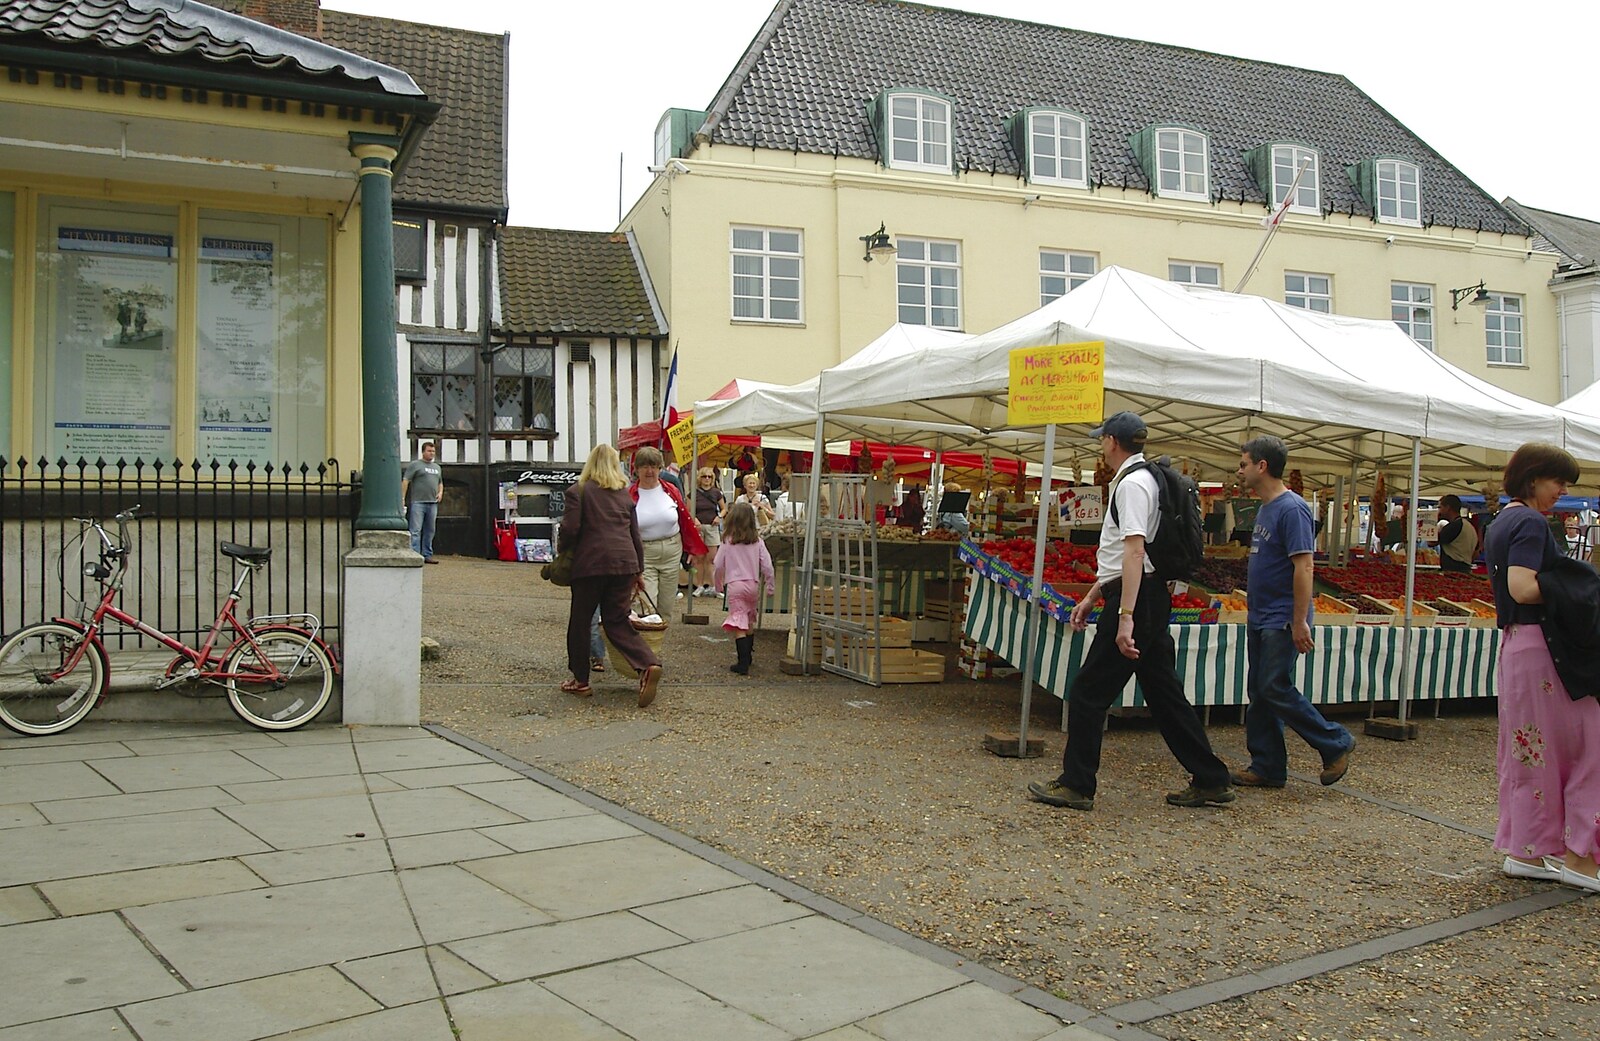 Stalls near the museum from A French Market Visits, Diss, Norfolk - 24th June 2006